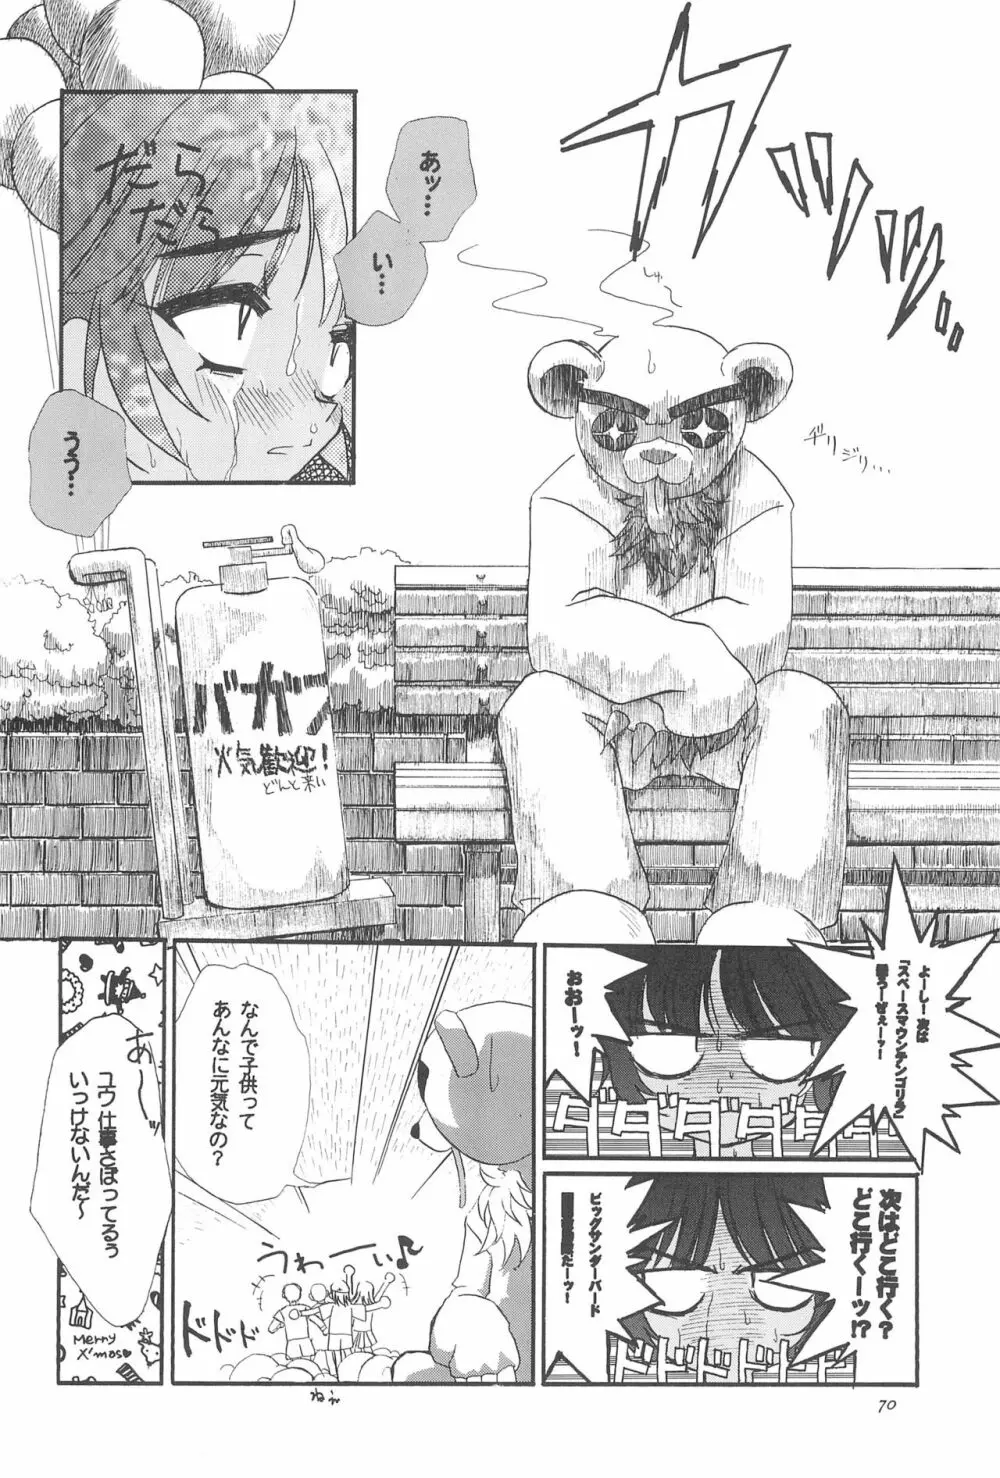 8th of ace Page.74